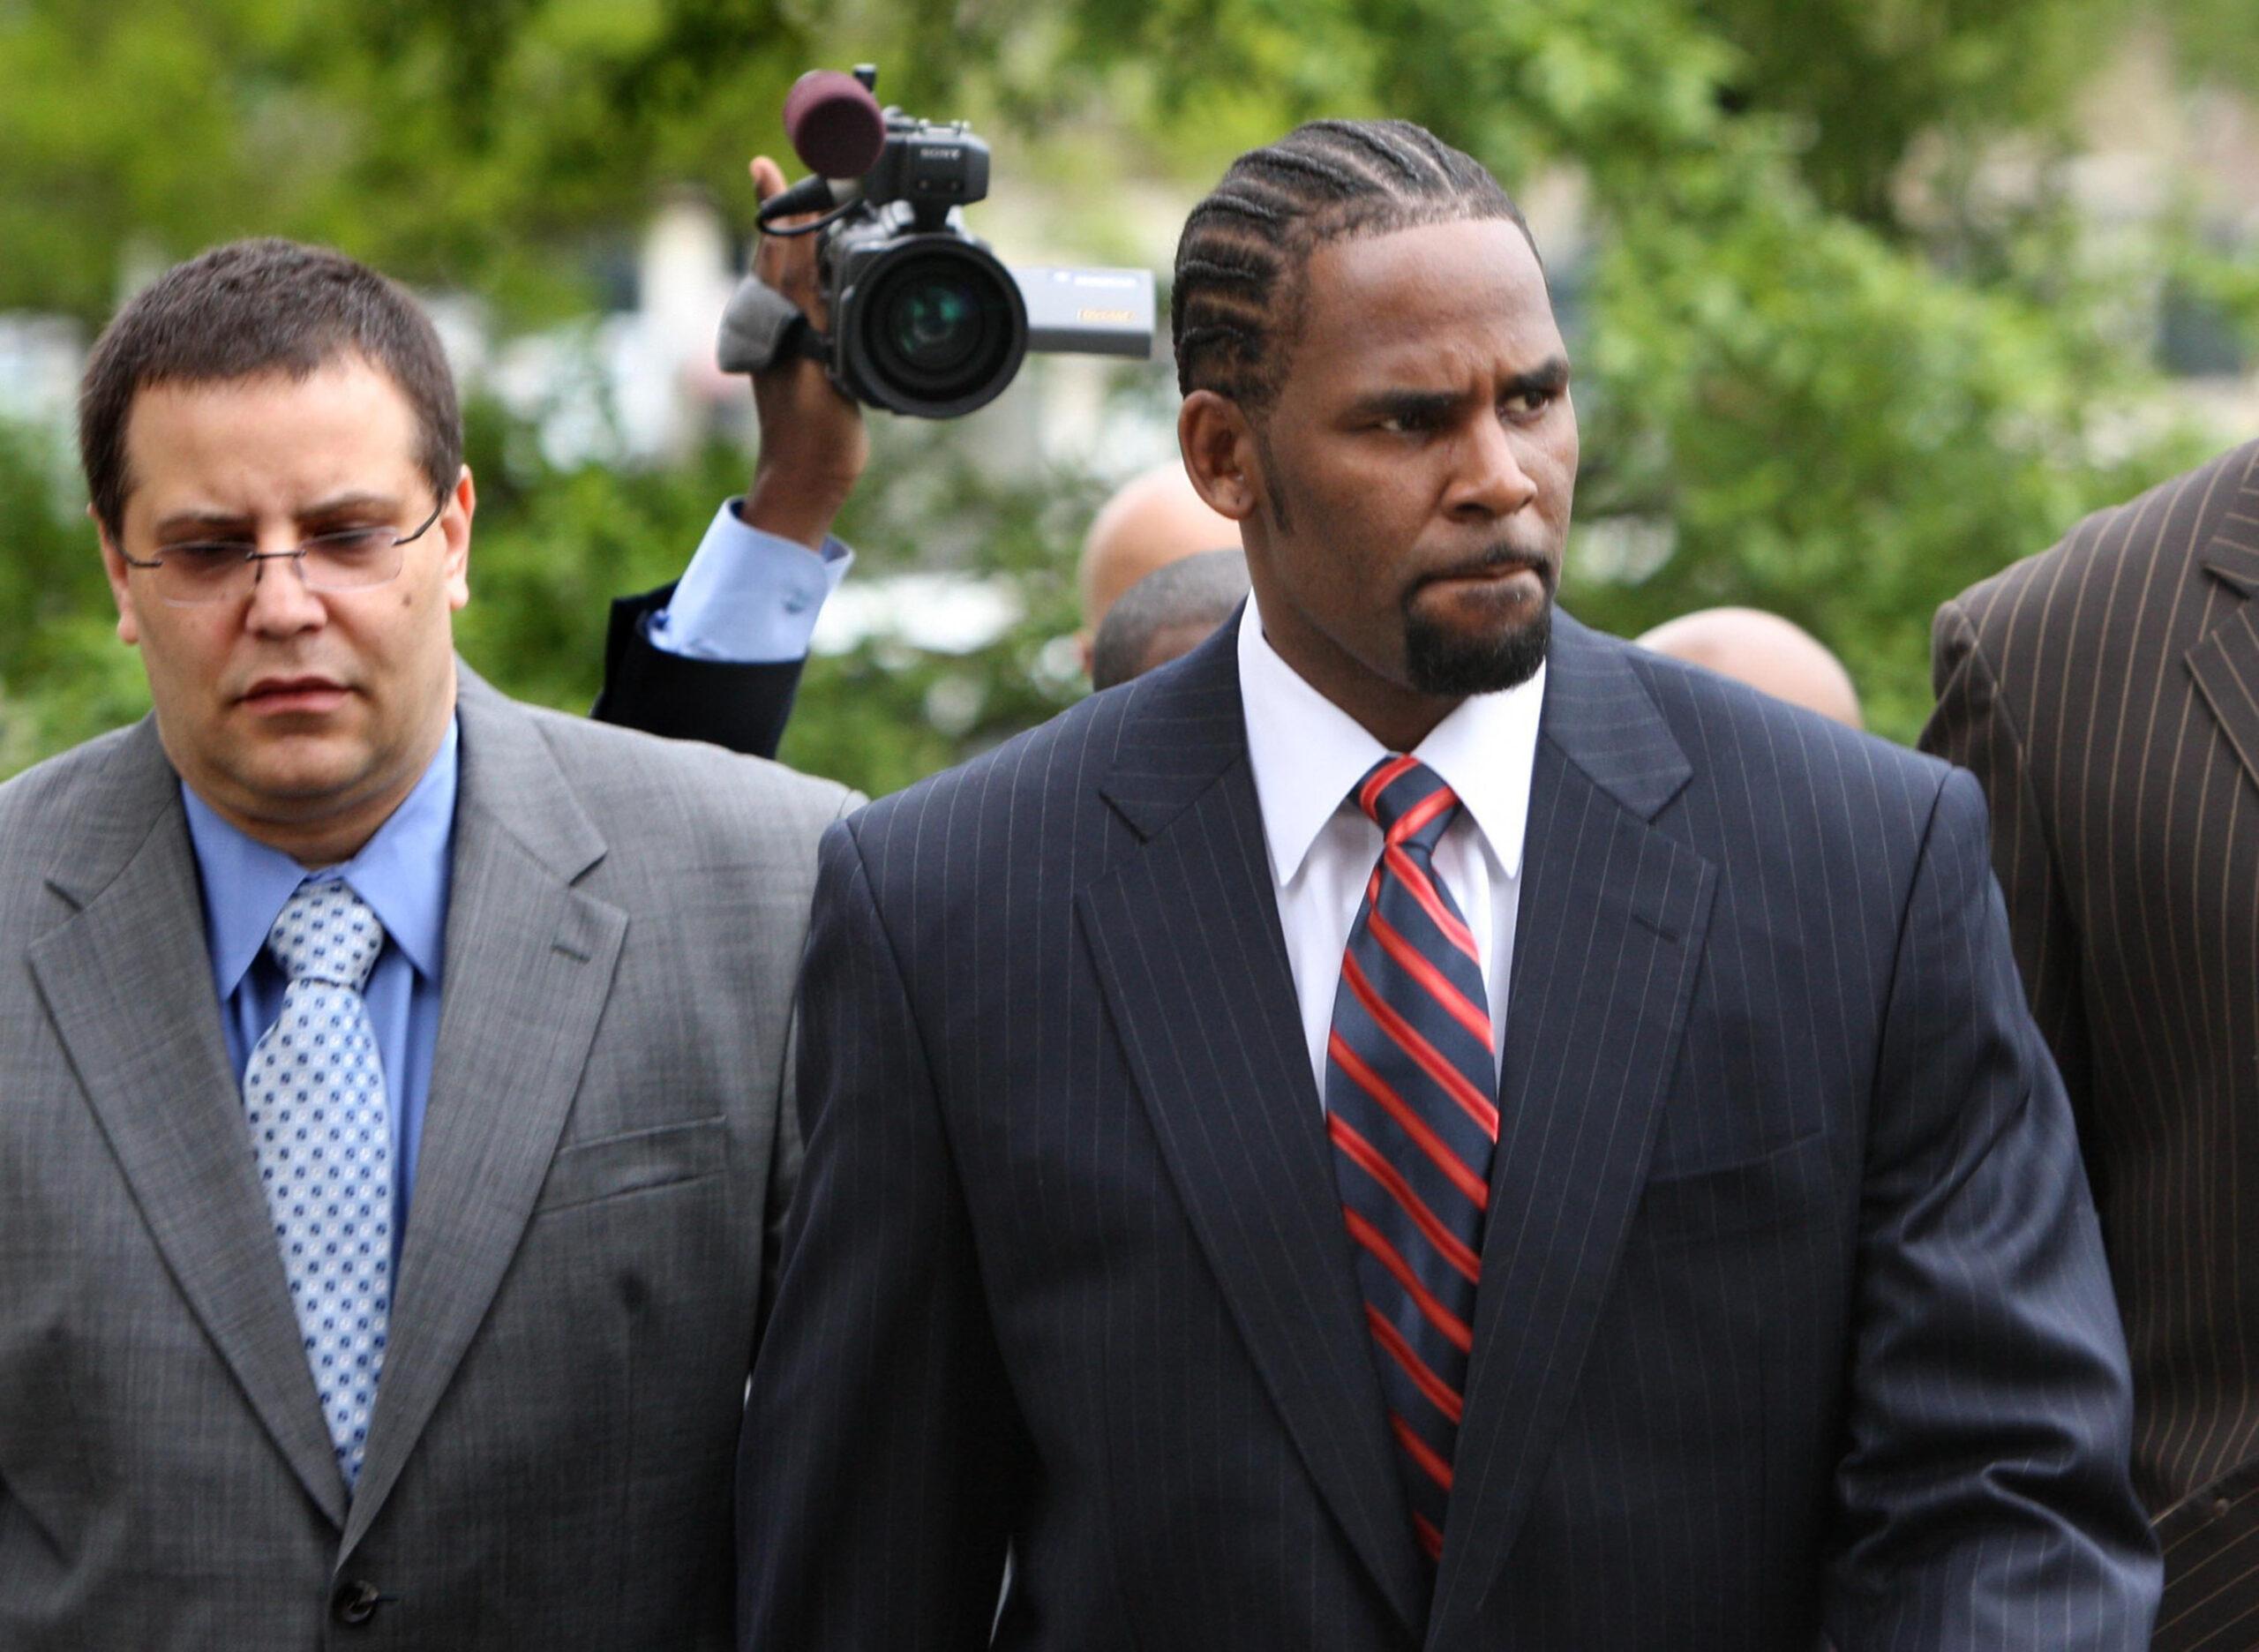 R. Kelly arrives with manager Derrel McDavid at the Cook County Criminal Courts Building on May 20, 2008